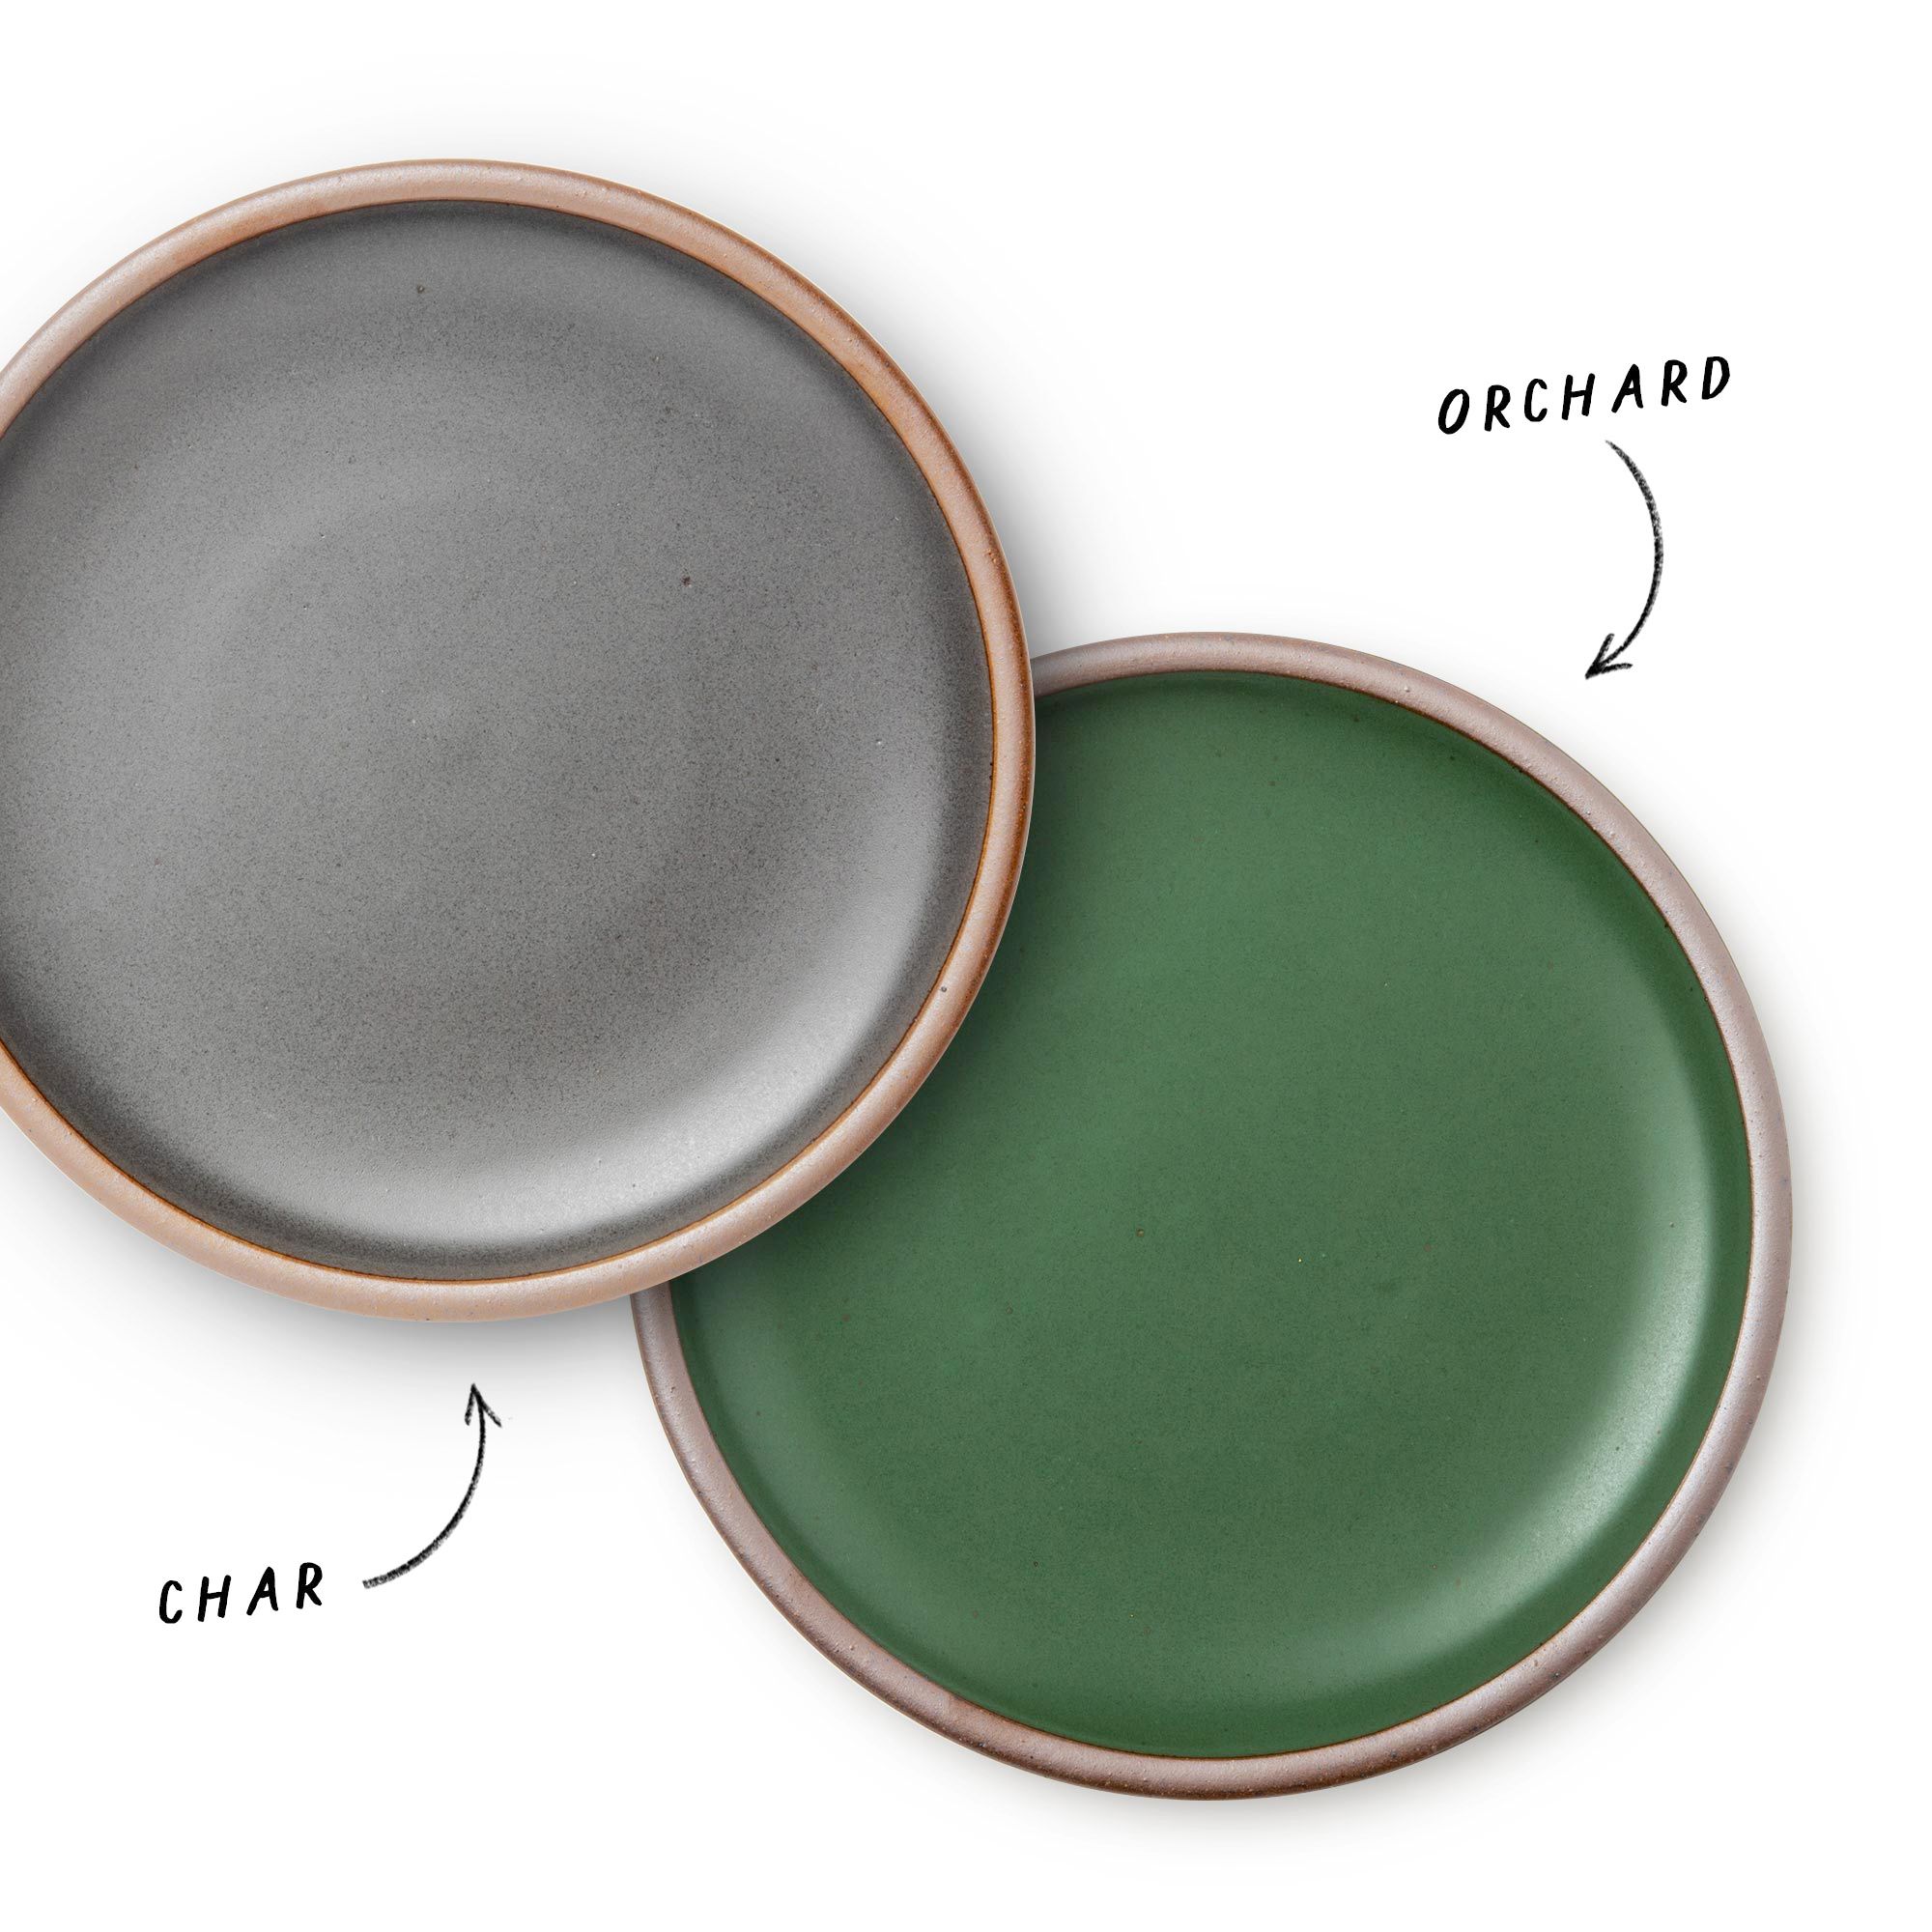 A studio shot of two overlapping dinner plates on a white background. In the upper left a medium grey plate is labeled "Char" overlapping a bright green plate in the lower right labeled "Orchard."